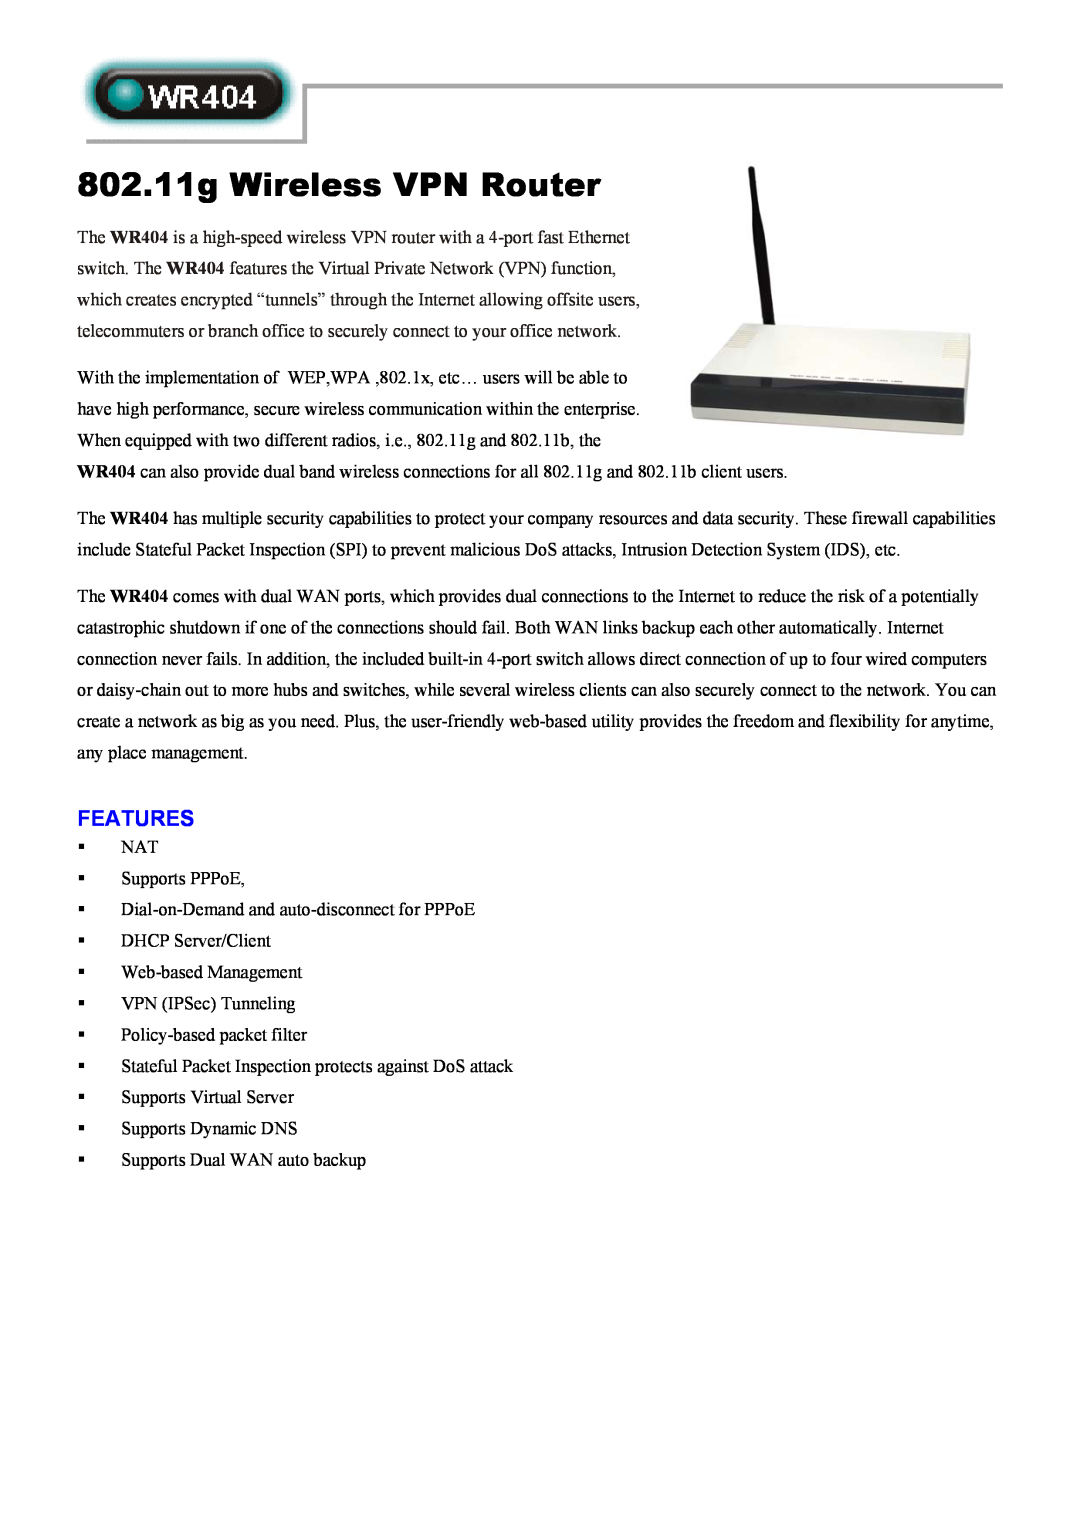 Abocom WR404 manual Features, 802.11g Wireless VPN Router 